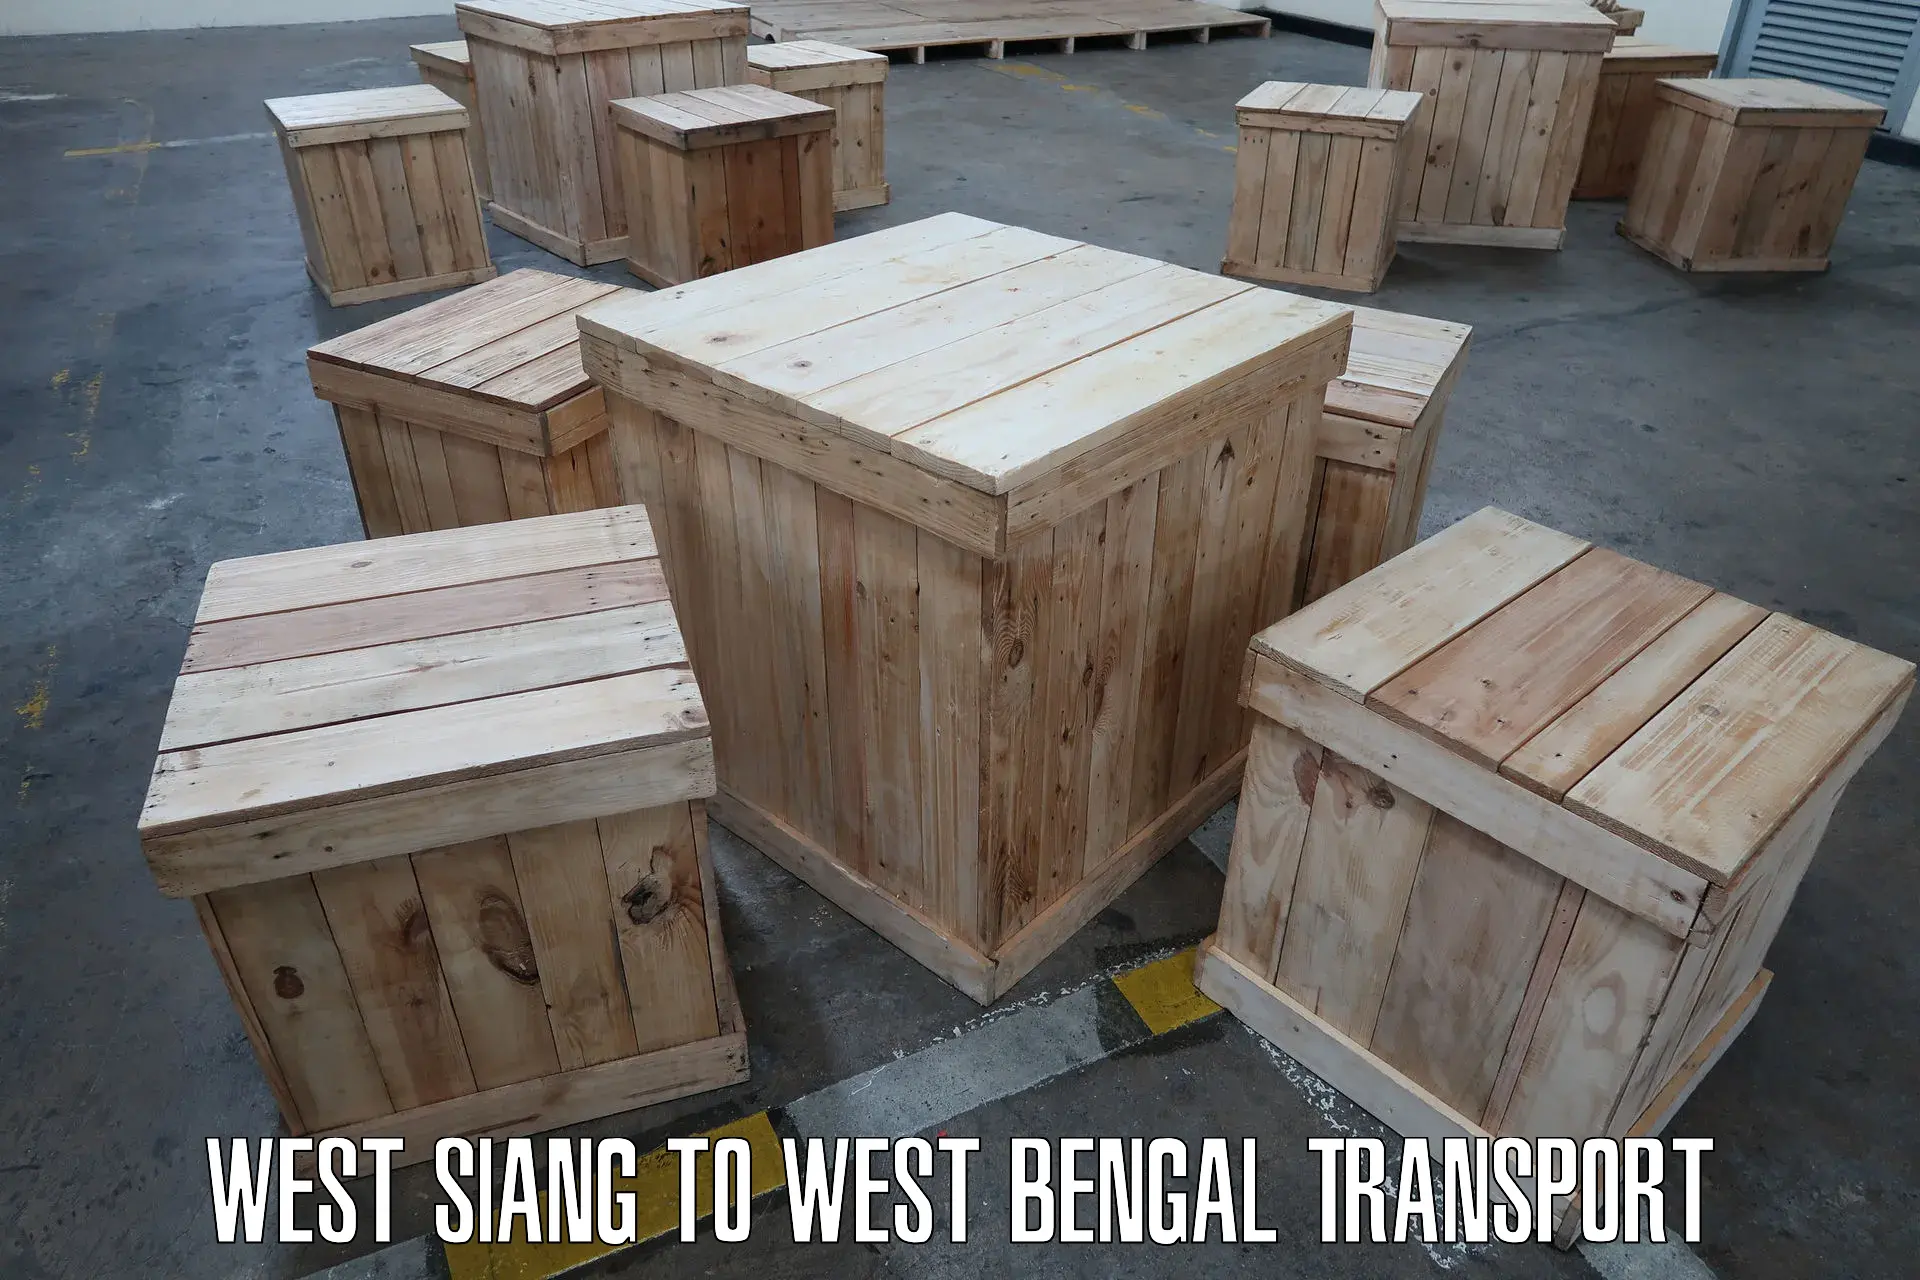 Truck transport companies in India West Siang to South 24 Parganas